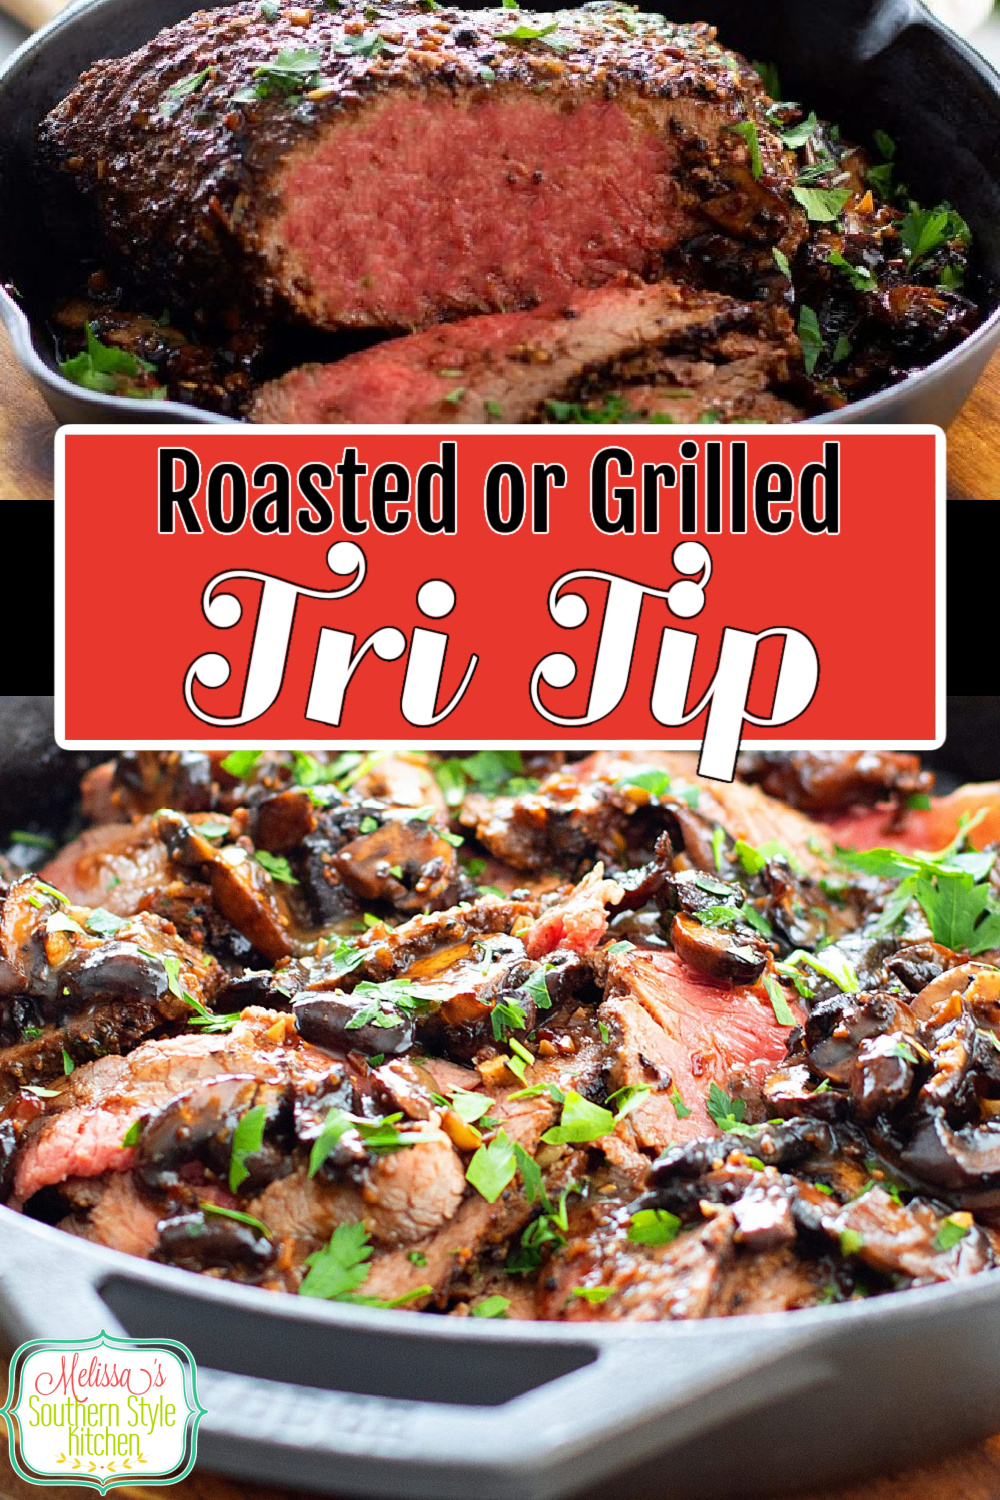 This perfectly seasoned Tri Tip recipe is a delectable option whether you choose to roast it in the oven or sear it on the grill #tritiprecipe #easybeefrecipes #tritipsteak #tritiproast #dinnerideas #supper #southernrecipes via @melissasssk